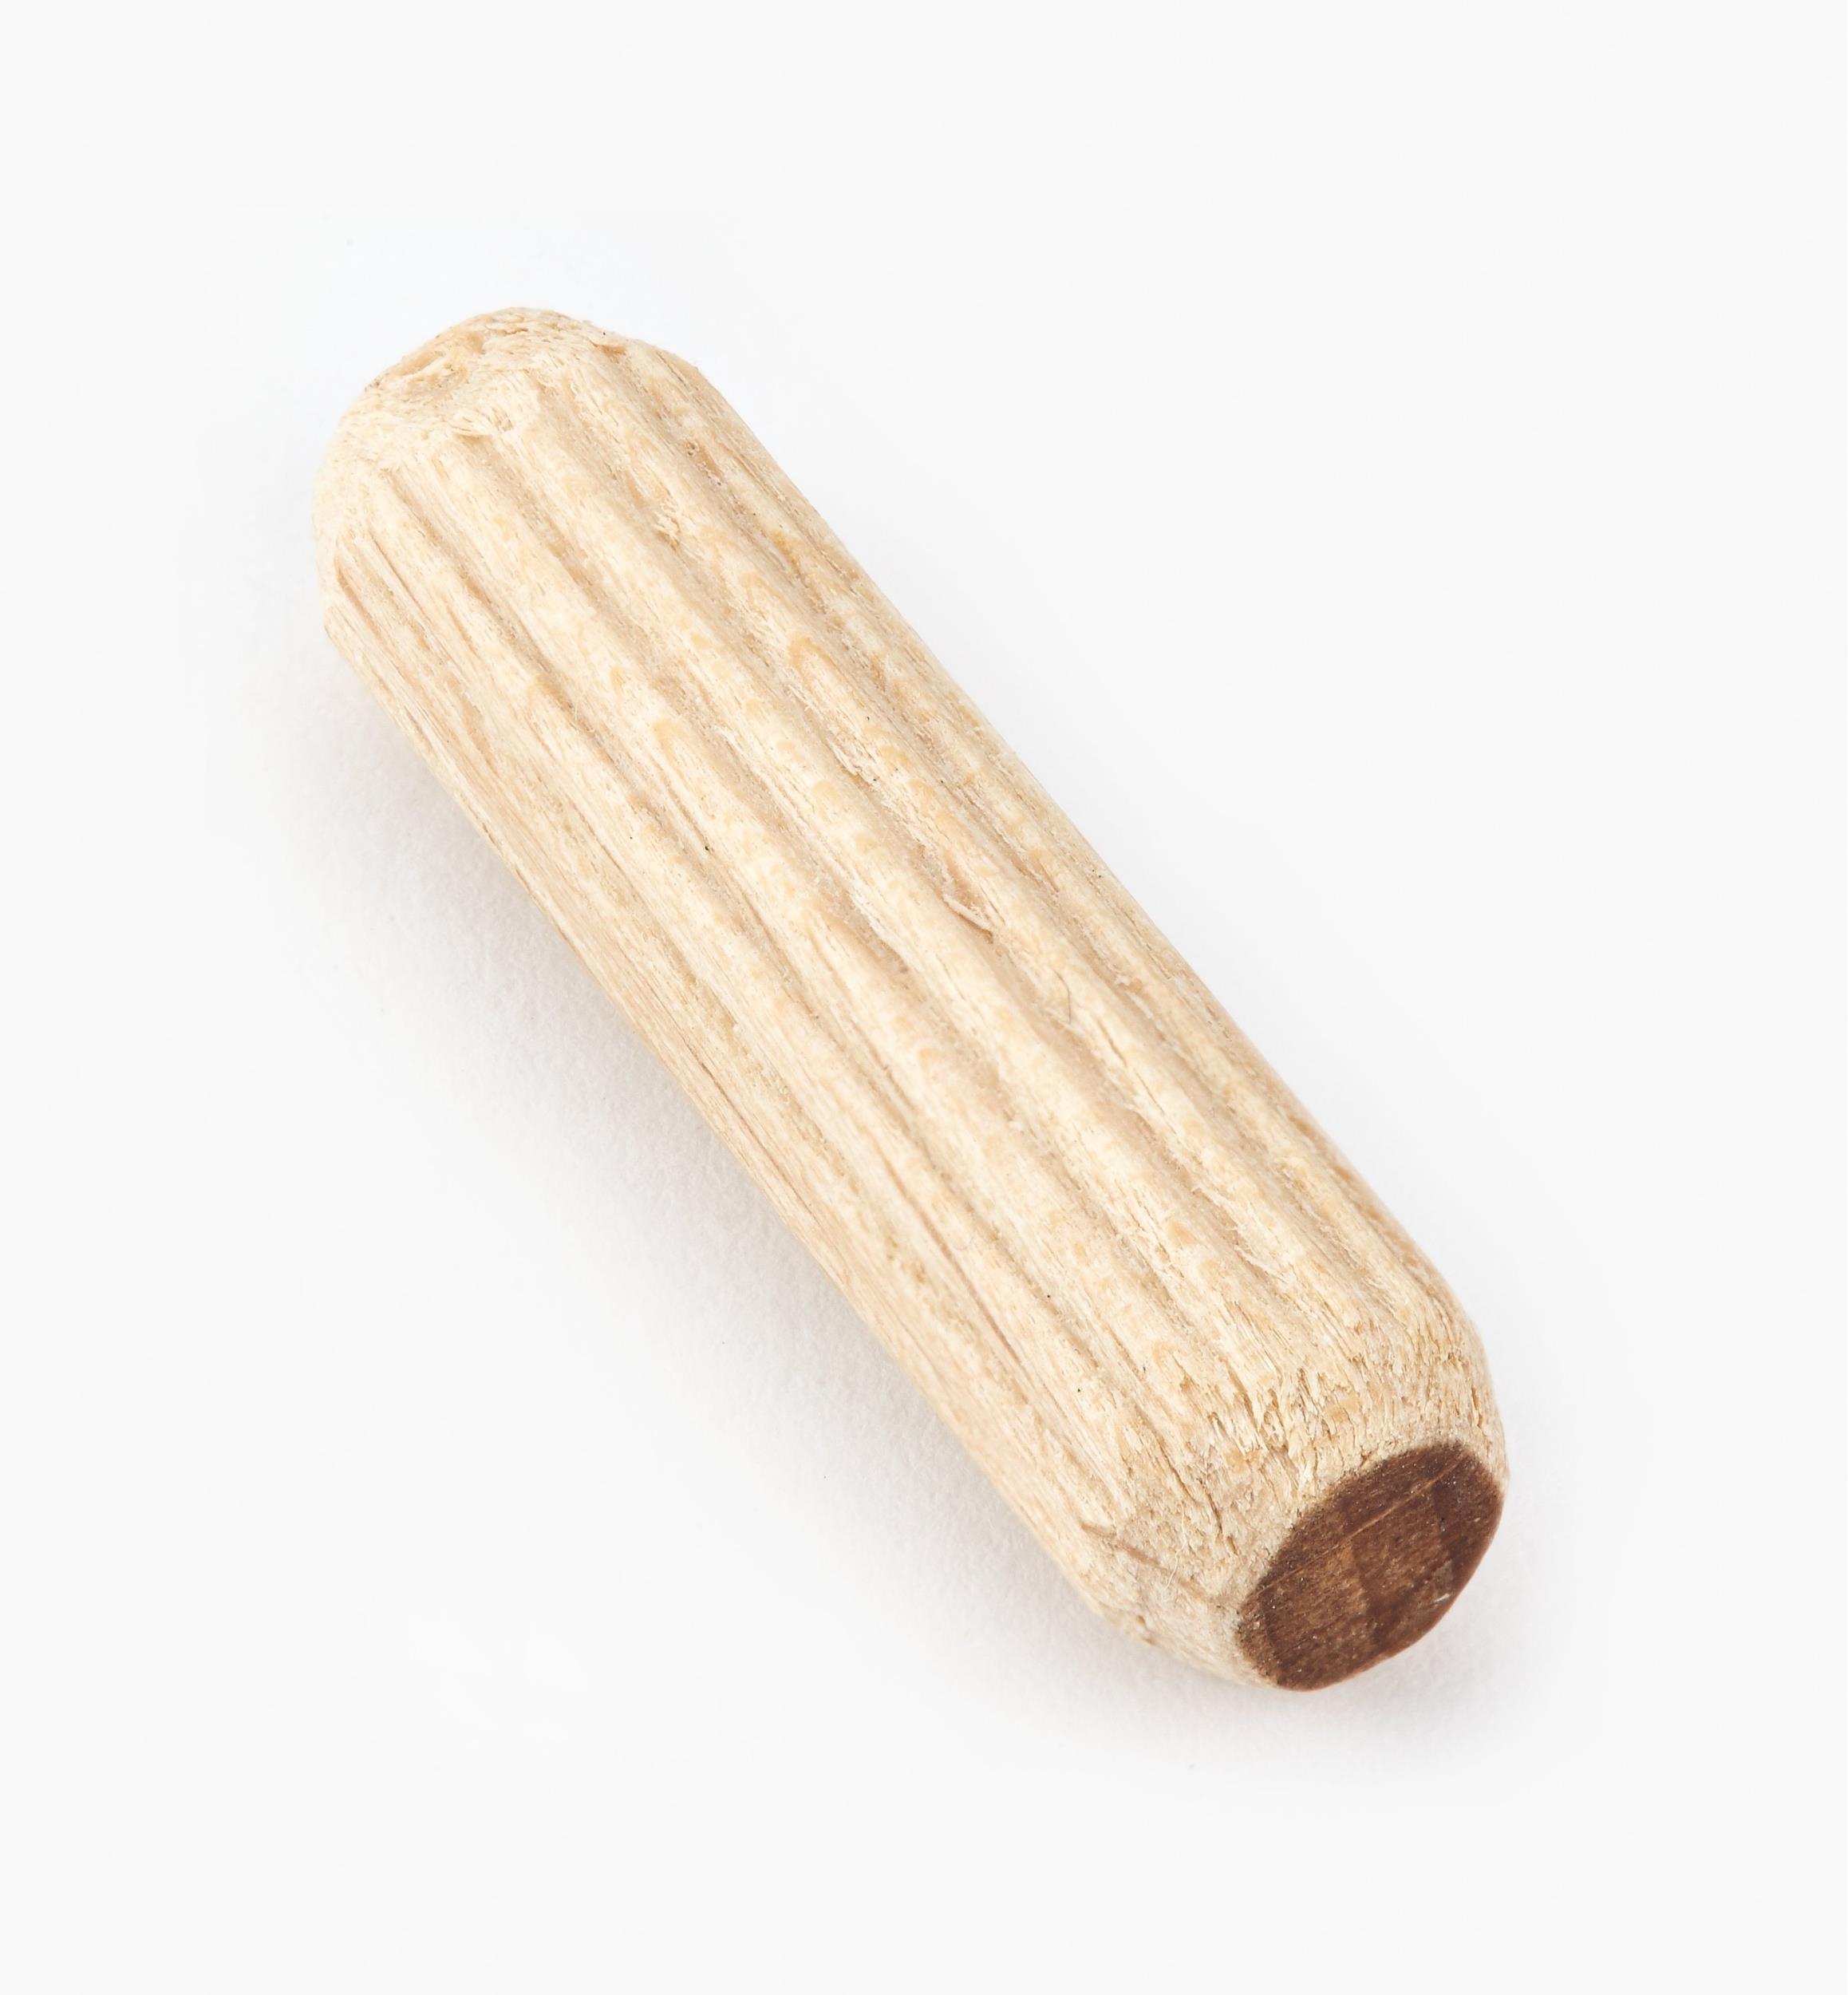 6mm x 30mm FLUTED HARDWOOD WOODEN DOWEL PIN FOR WOODWORKING 200 